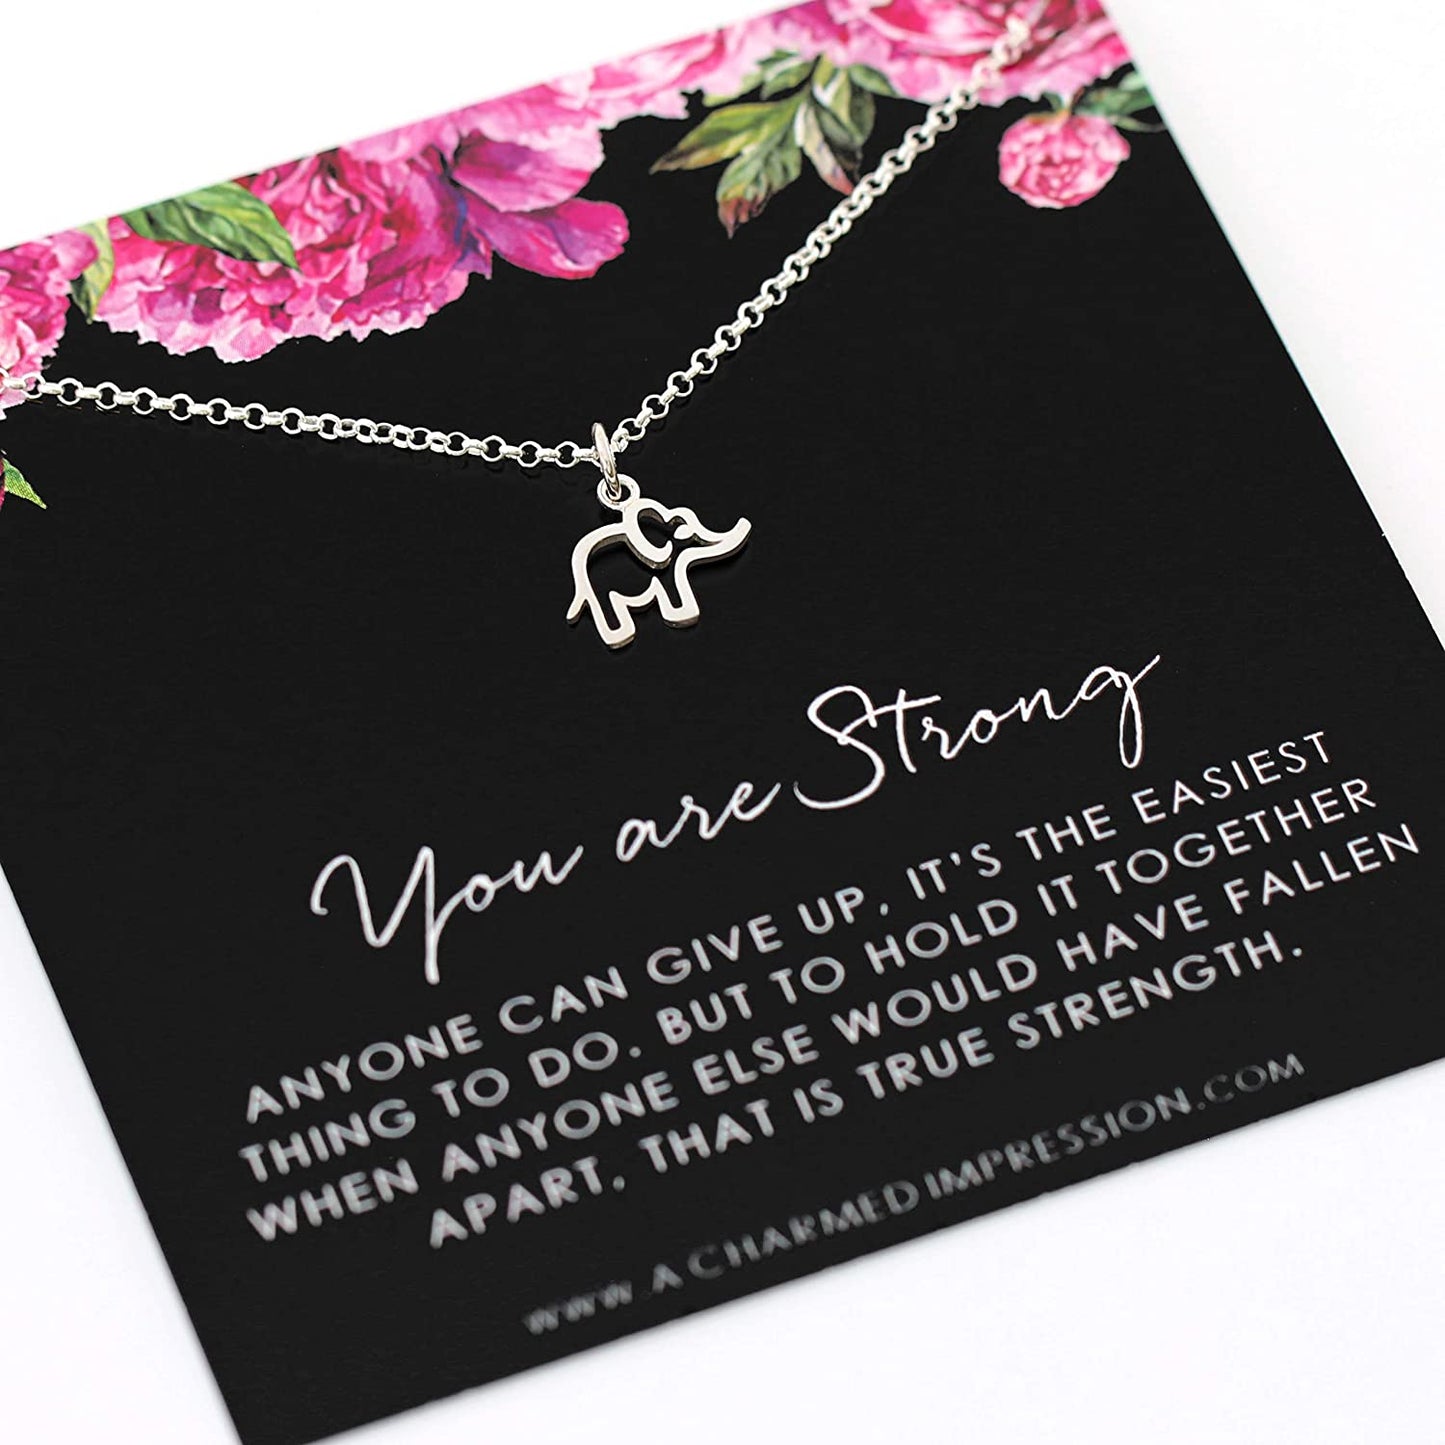 You are Strong • Inspirational Gifts for Women • Sterling Silver Necklace • Lucky Elephant Charm • Gift for Cancer Survivor, Infertility, Suicide, Recovery, Divorce, Depression • Encouragement Gifts